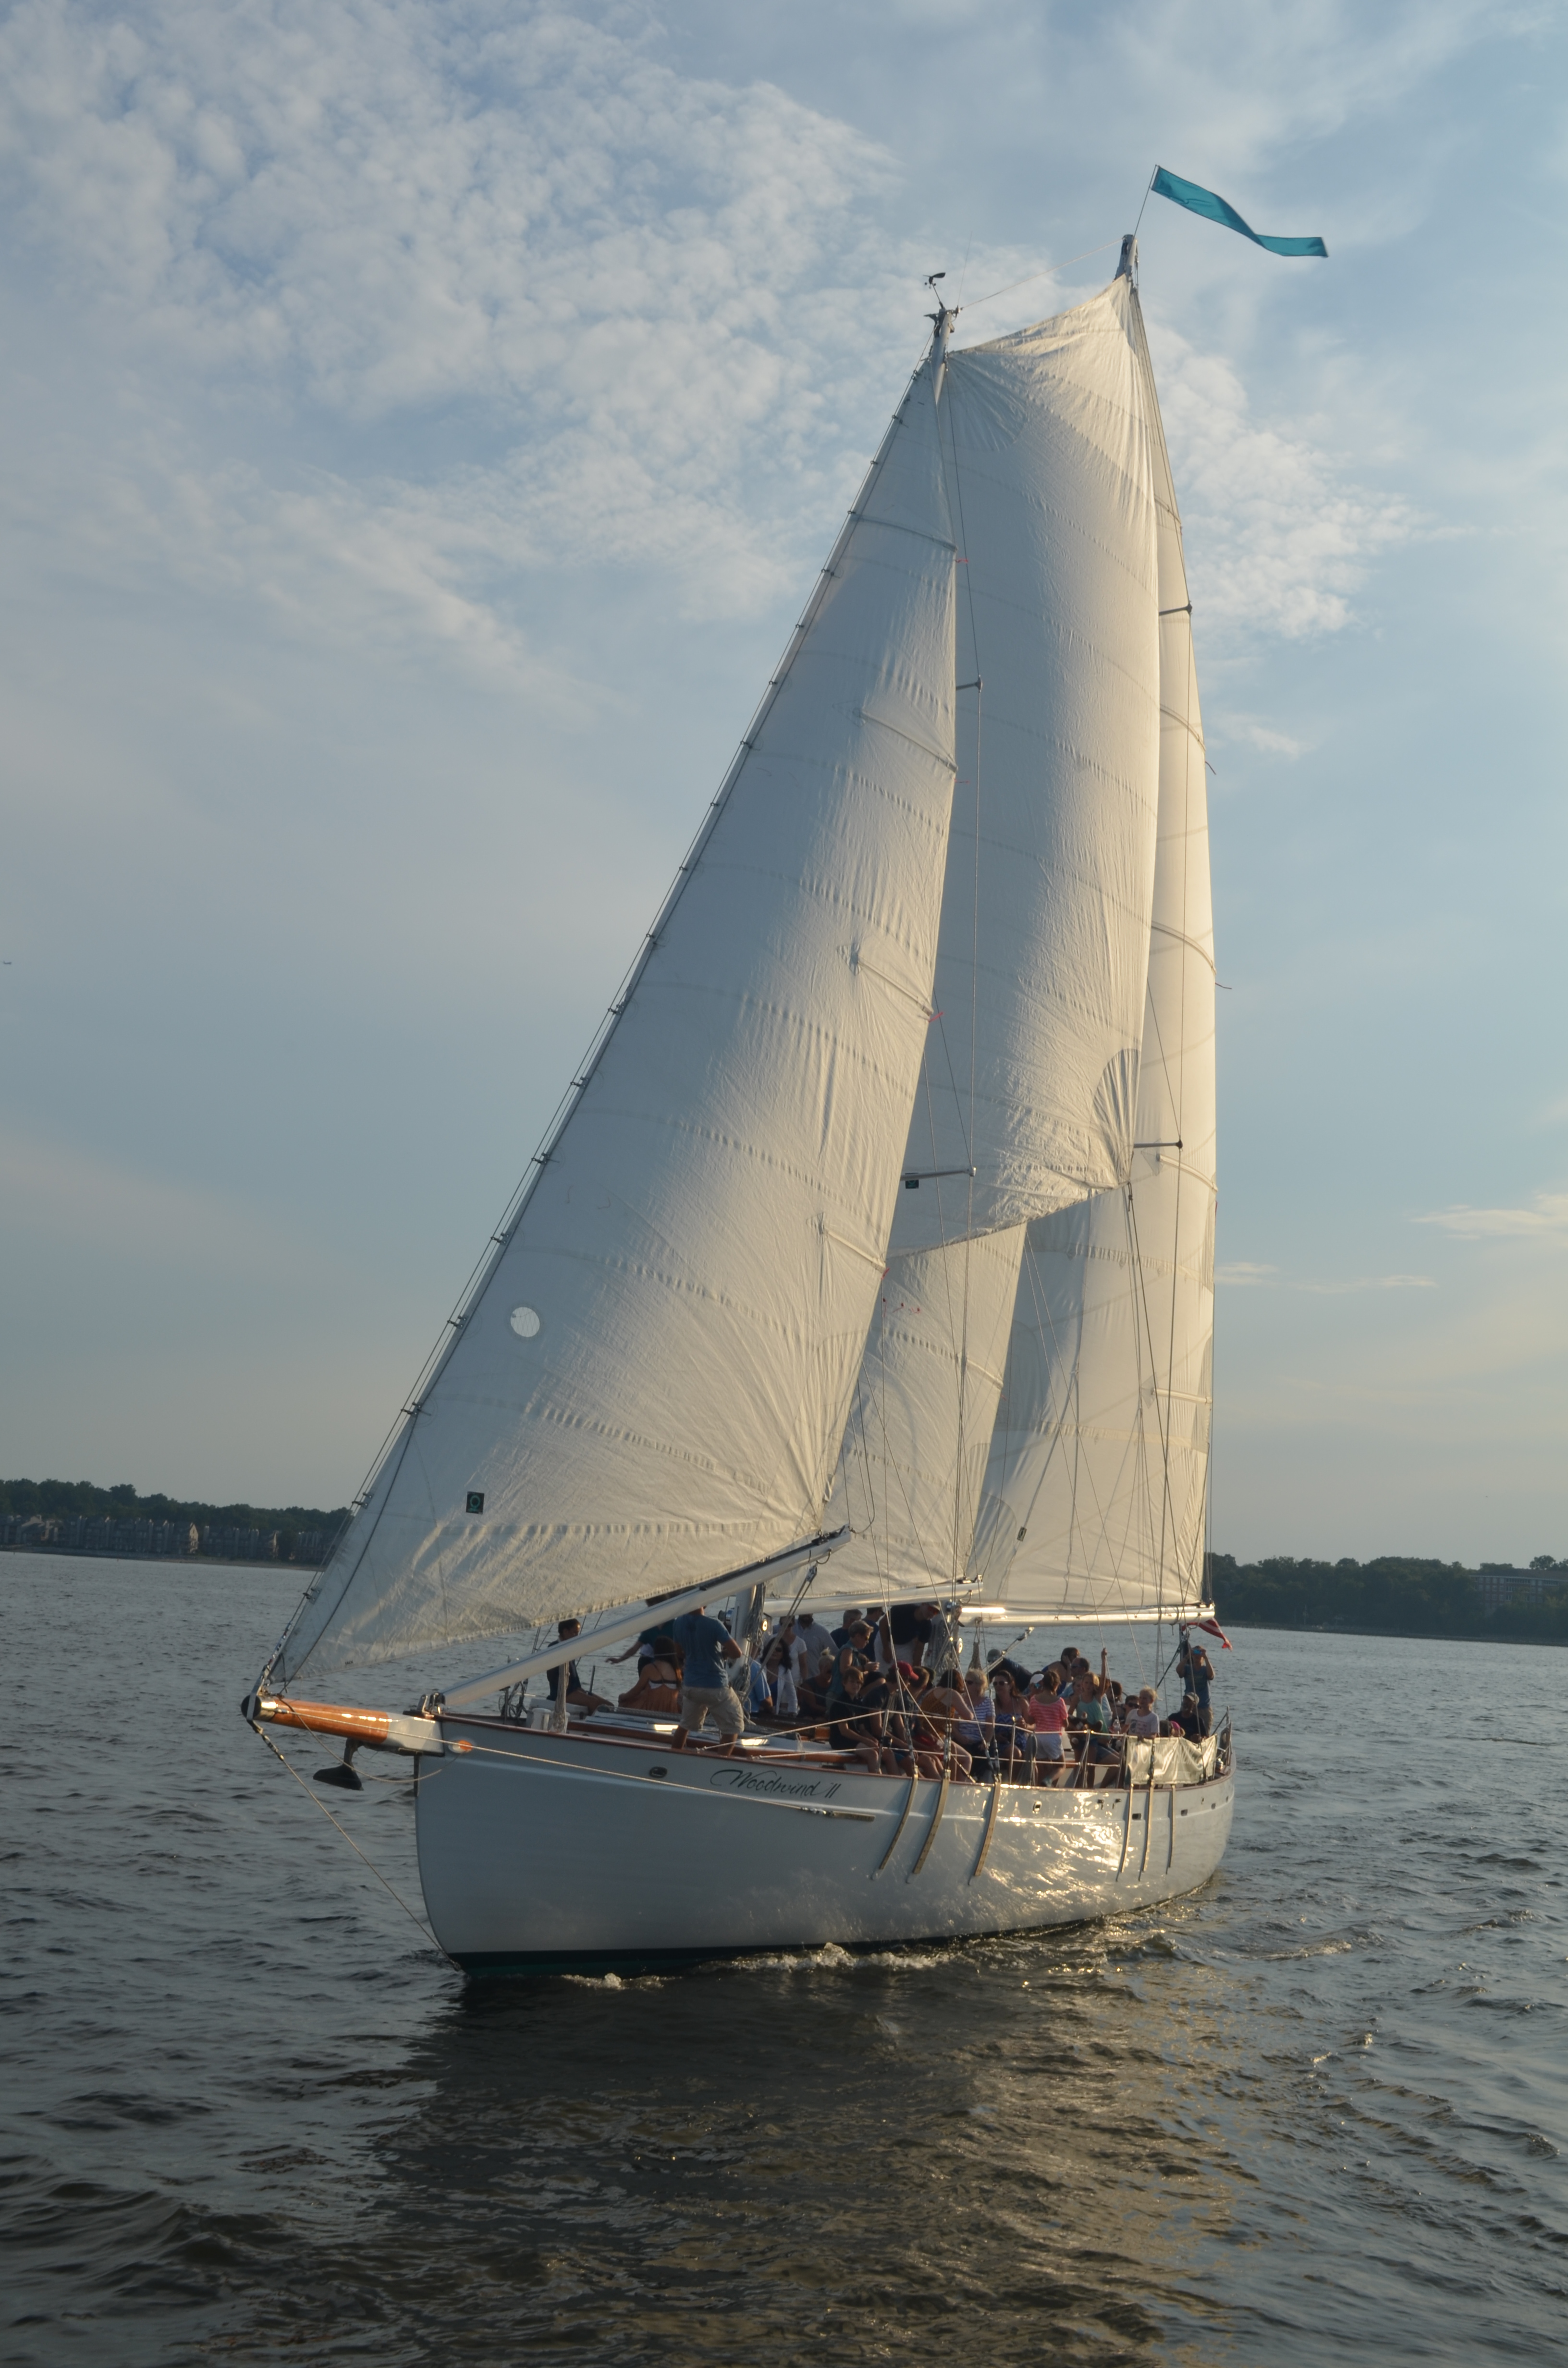 Schooner sailing with guests aboard on a sunny day